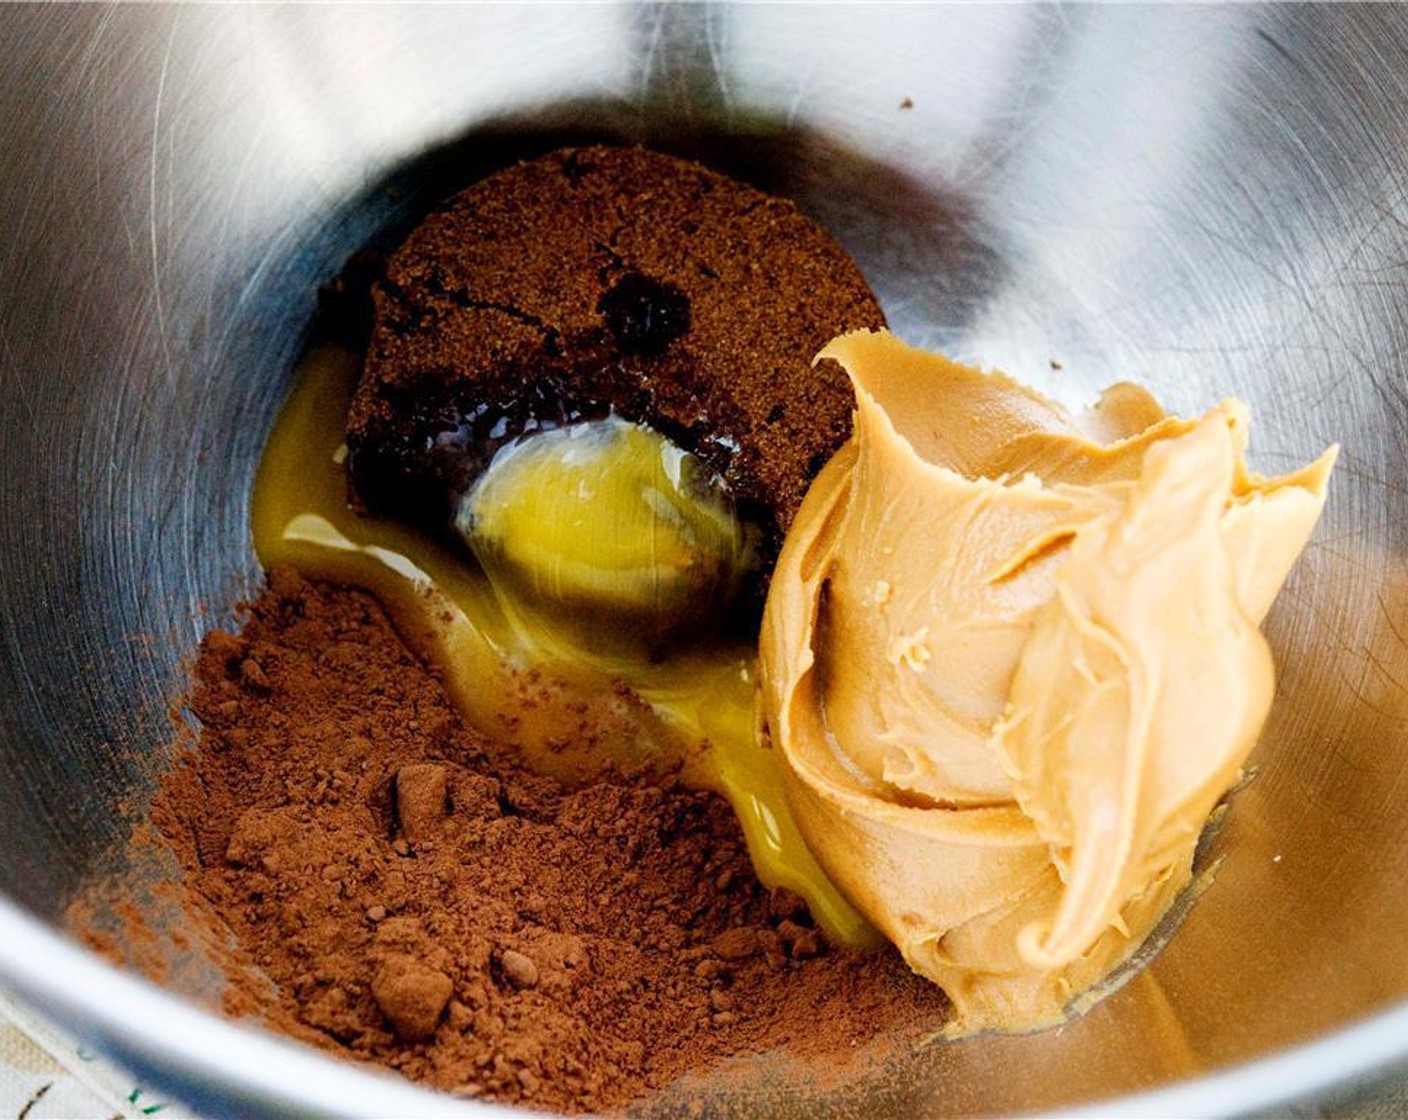 step 1 In the bowl of your electric mixer, combine Creamy Peanut Butter (1 cup), Dark Brown Sugar (1/3 cup), Farmhouse Eggs® Large Brown Egg (1), Unsweetened Cocoa Powder (3 Tbsp), and Baking Powder (1 tsp). Mix until all the ingredients are combined.